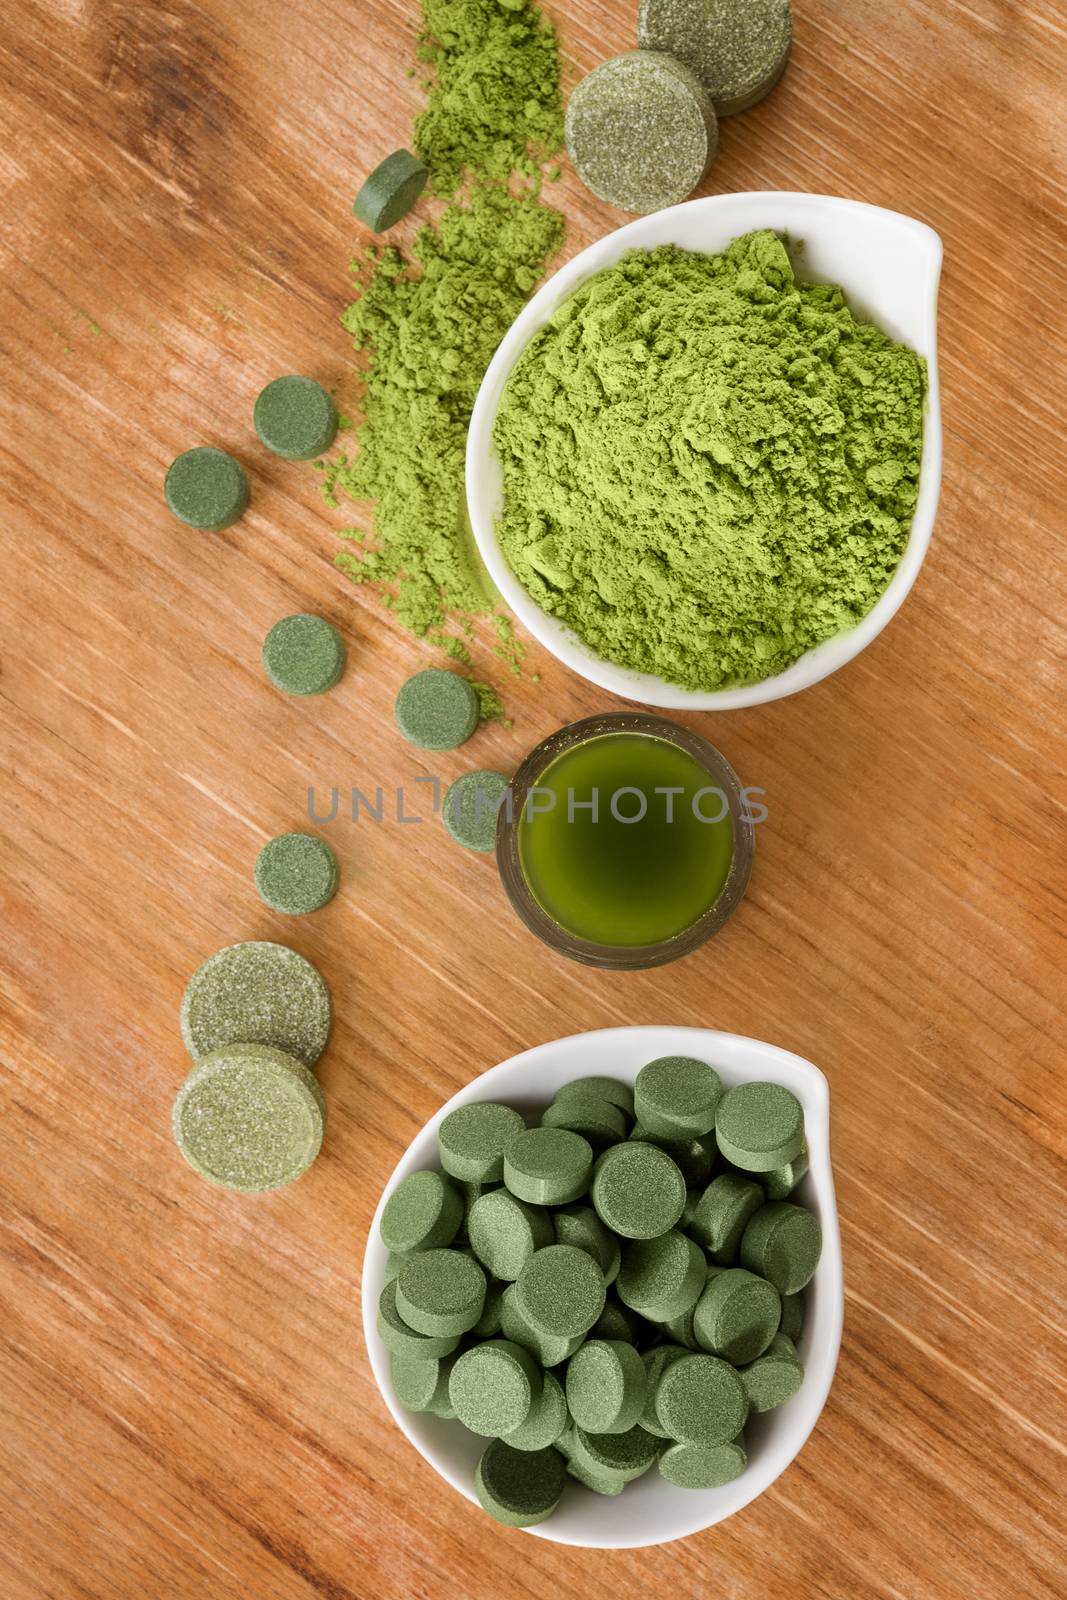 Detox. Chlorella pills, wheat grass powder and green drink in glass on brown wooden background, top view. Natural alternative medicine, weight loss and detox.